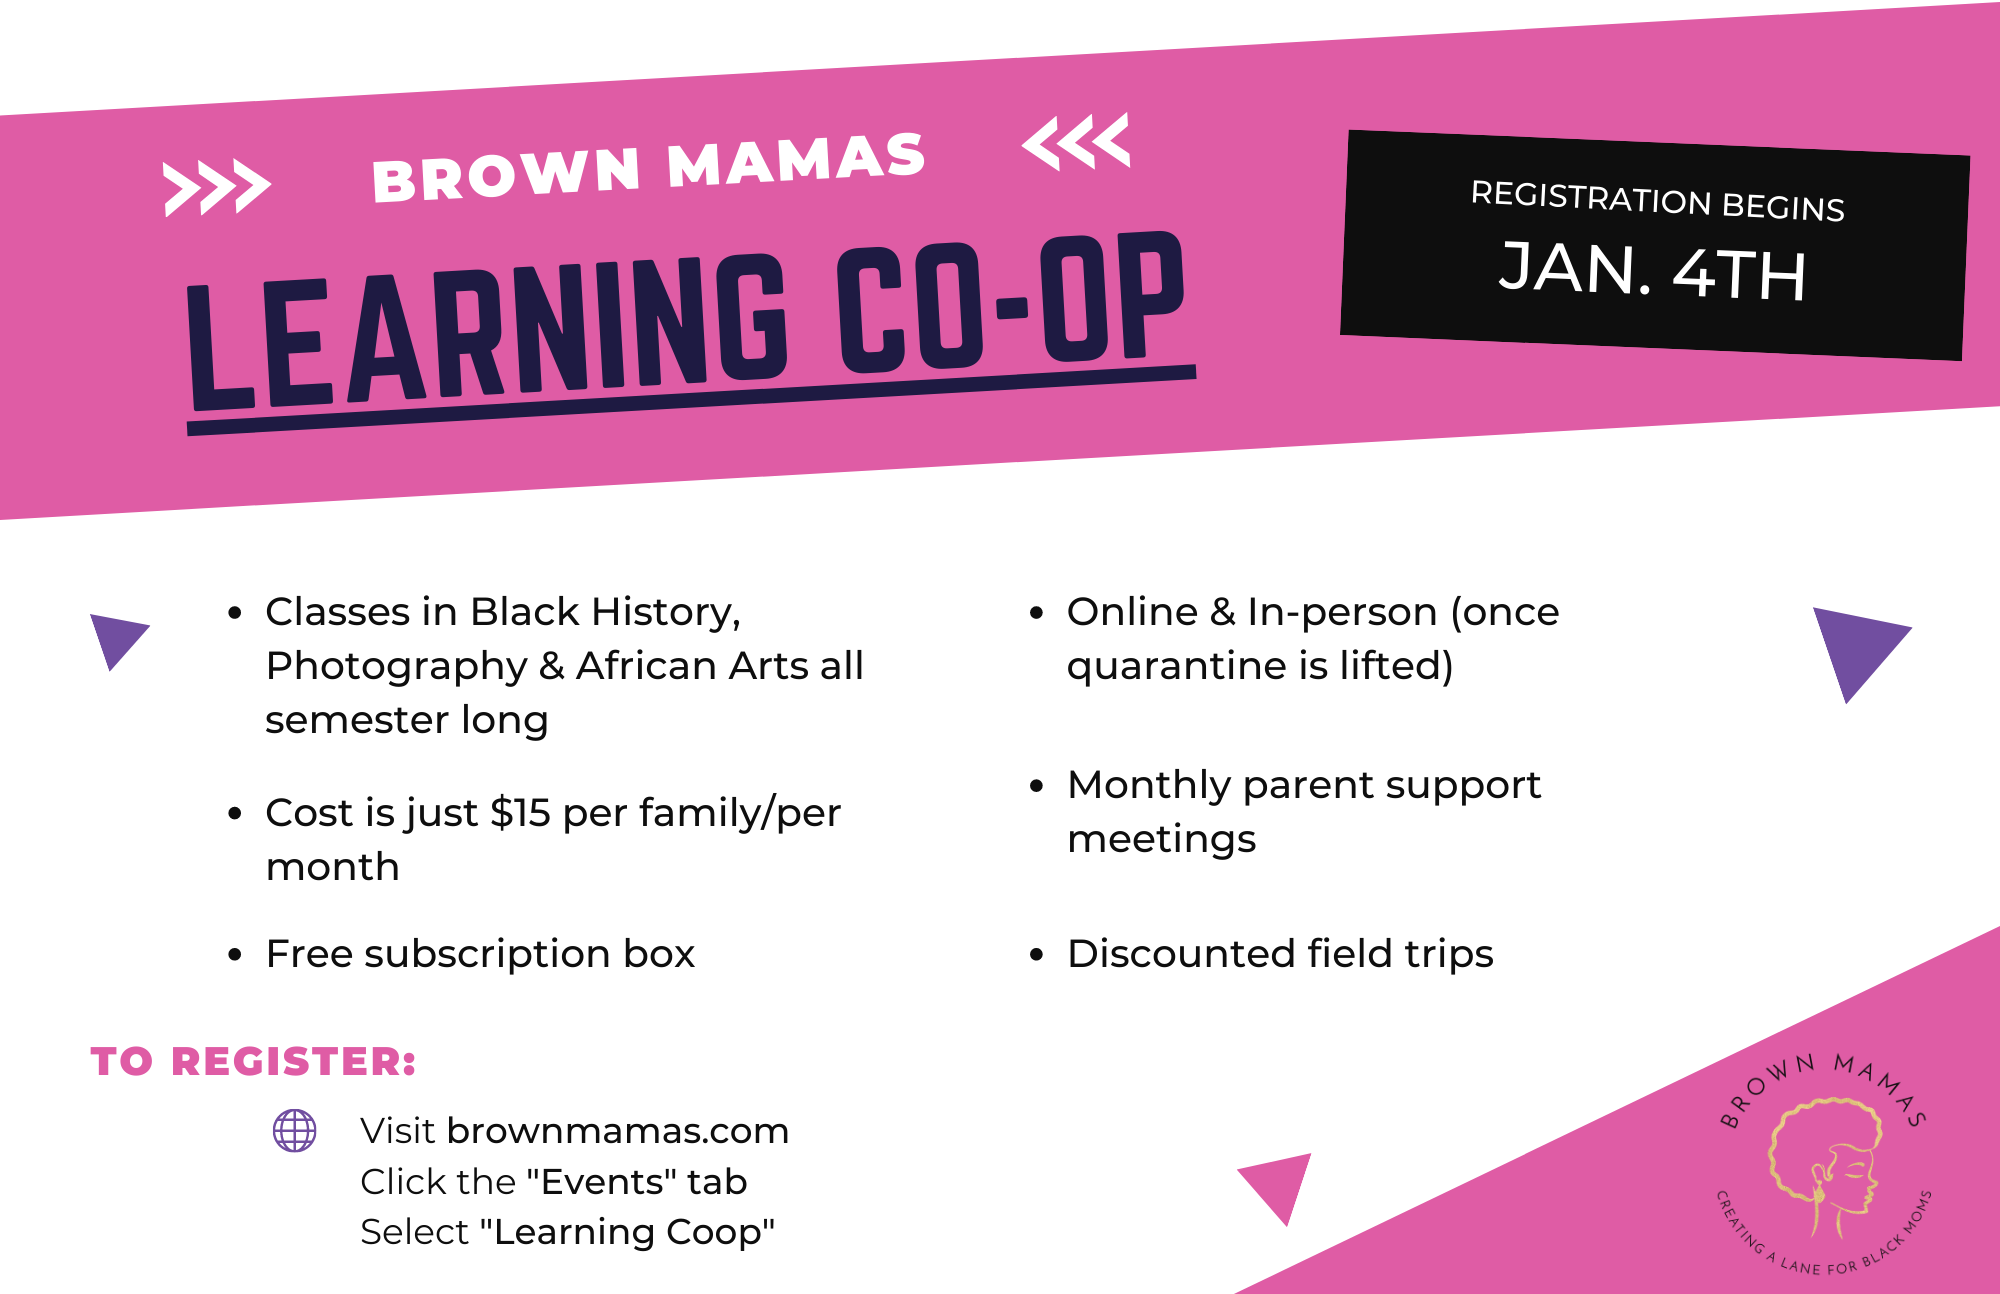 Brown Mamas Learning Cooperative Winter 2021